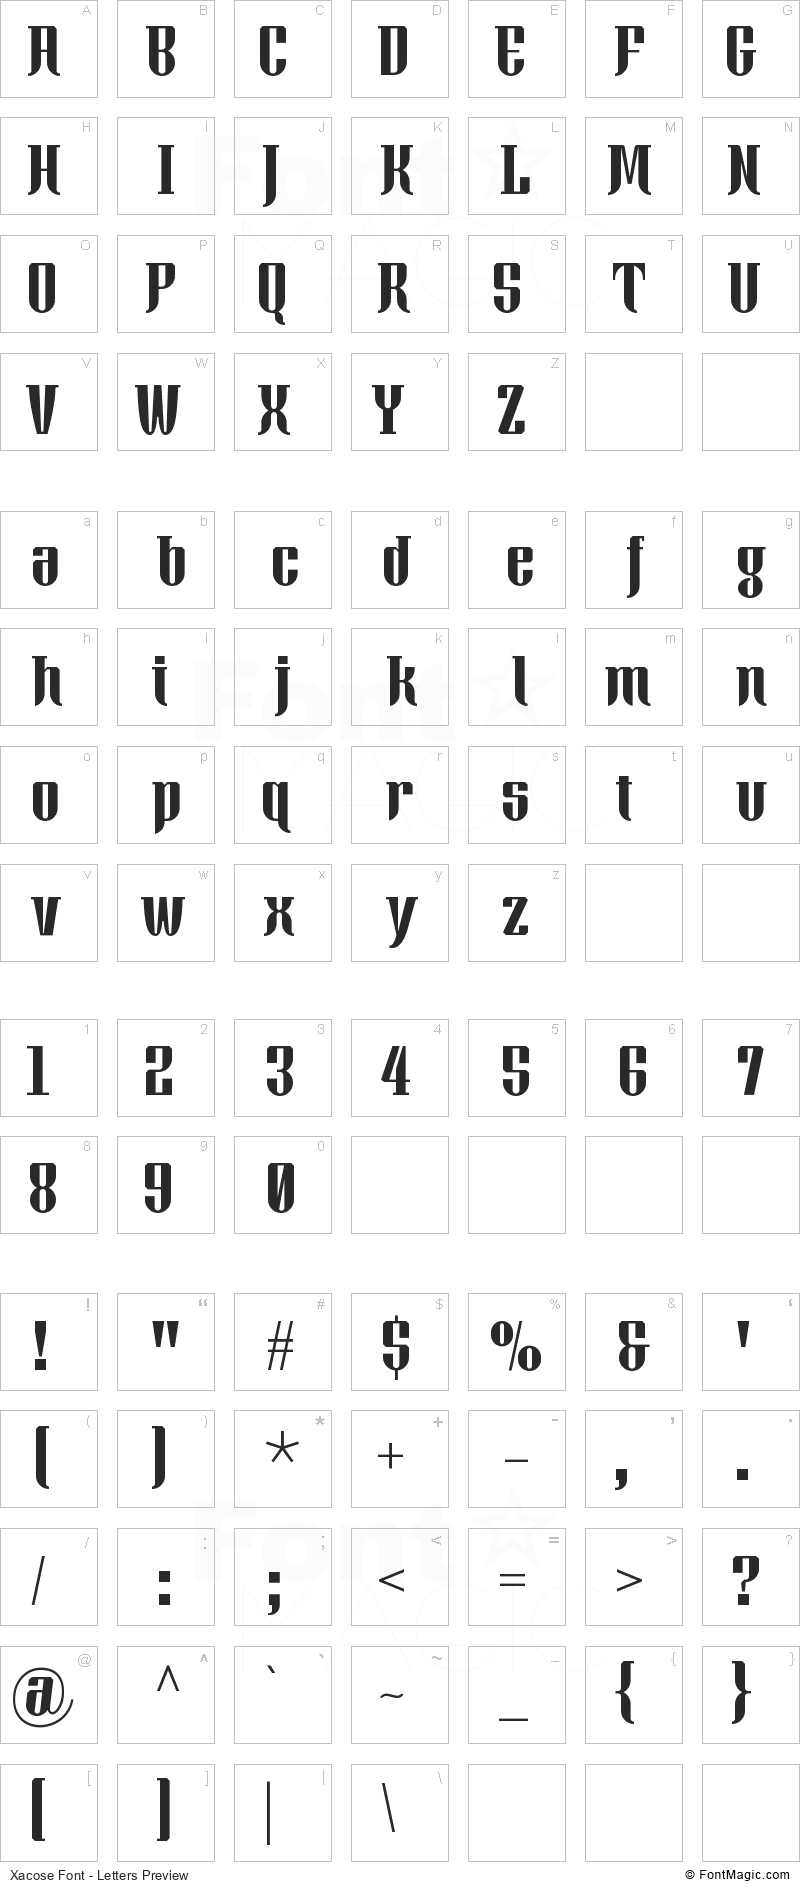 Xacose Font - All Latters Preview Chart